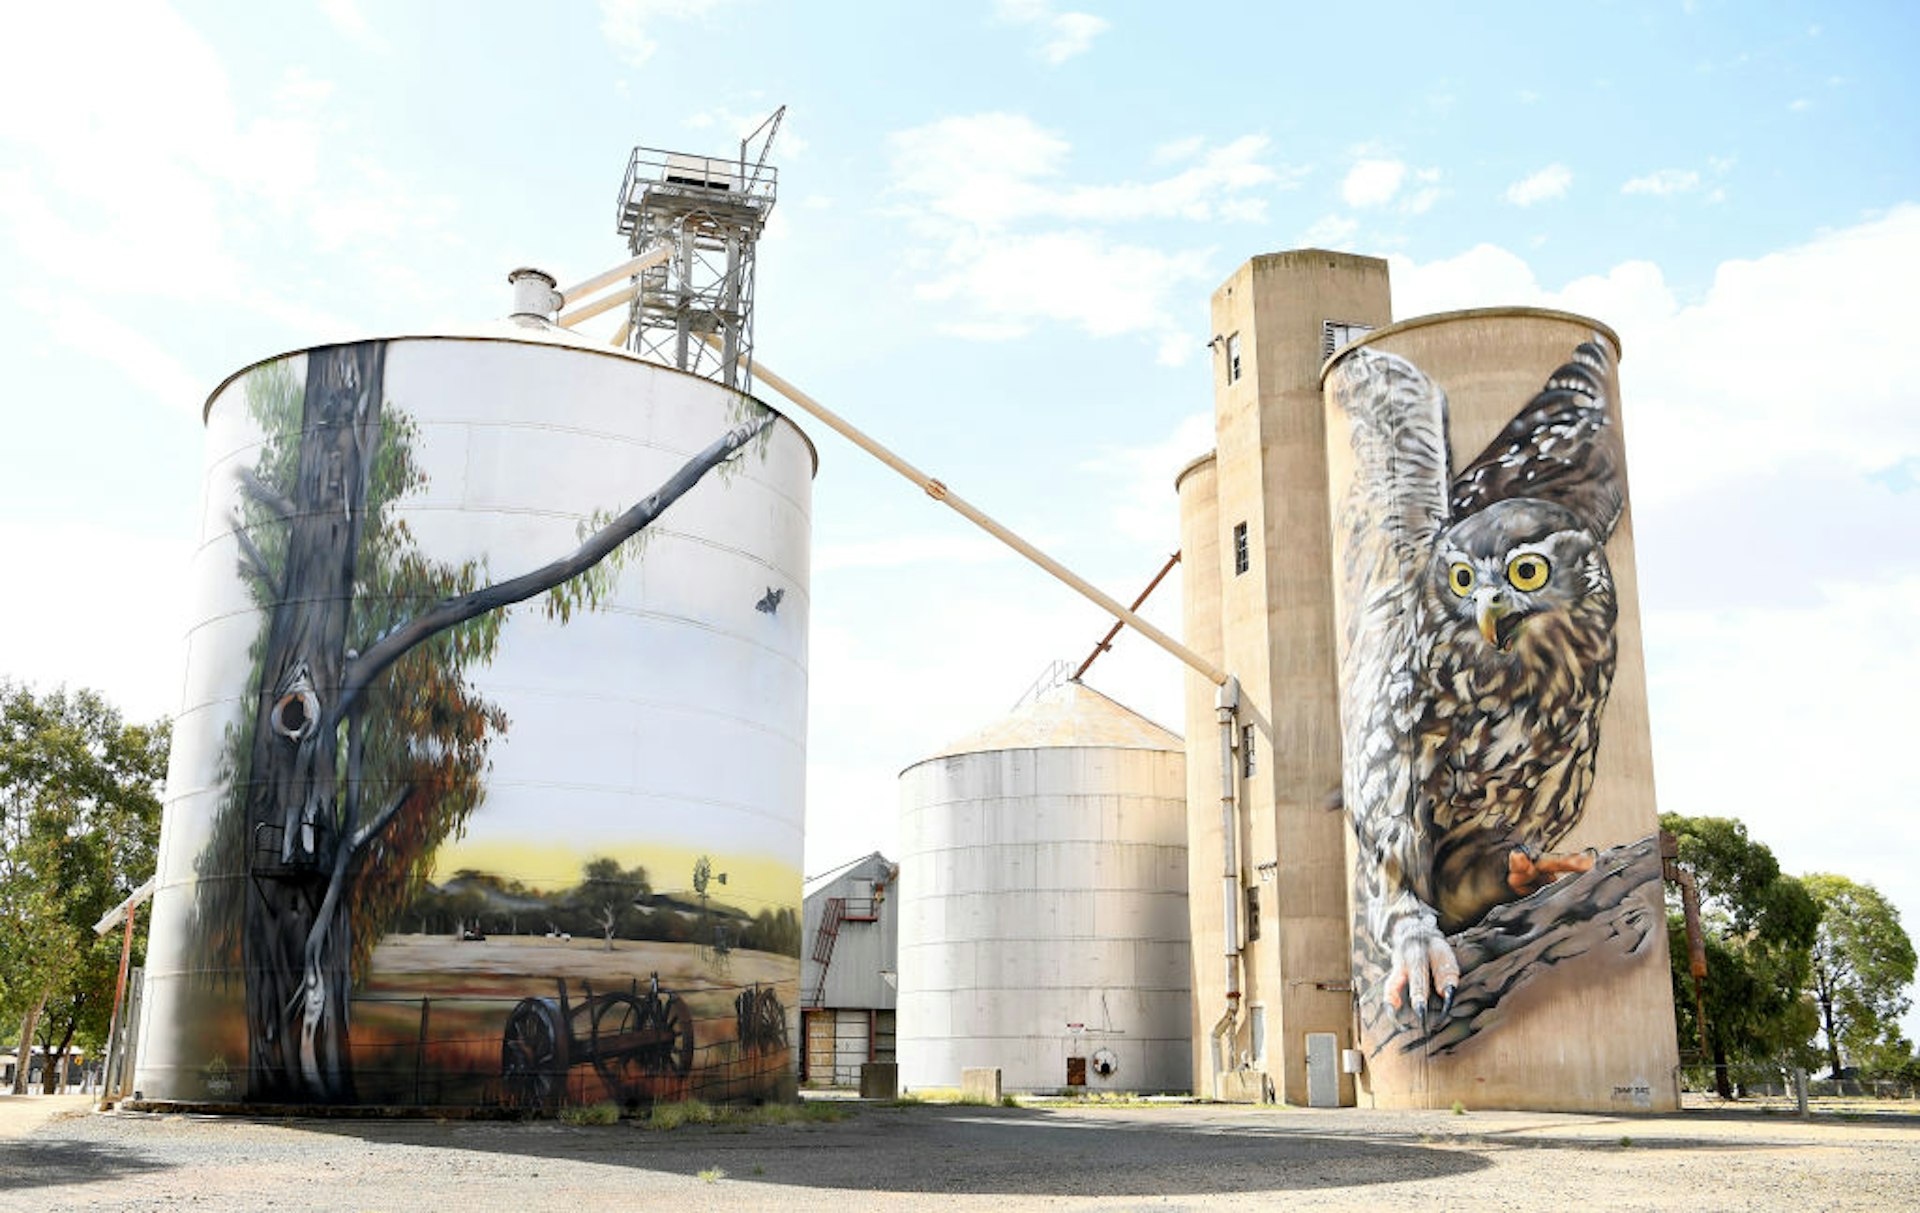 Silo Art Trail Sees Grain Storage Buildings Used As Artists' Canvasses Through Wimmera Mallee